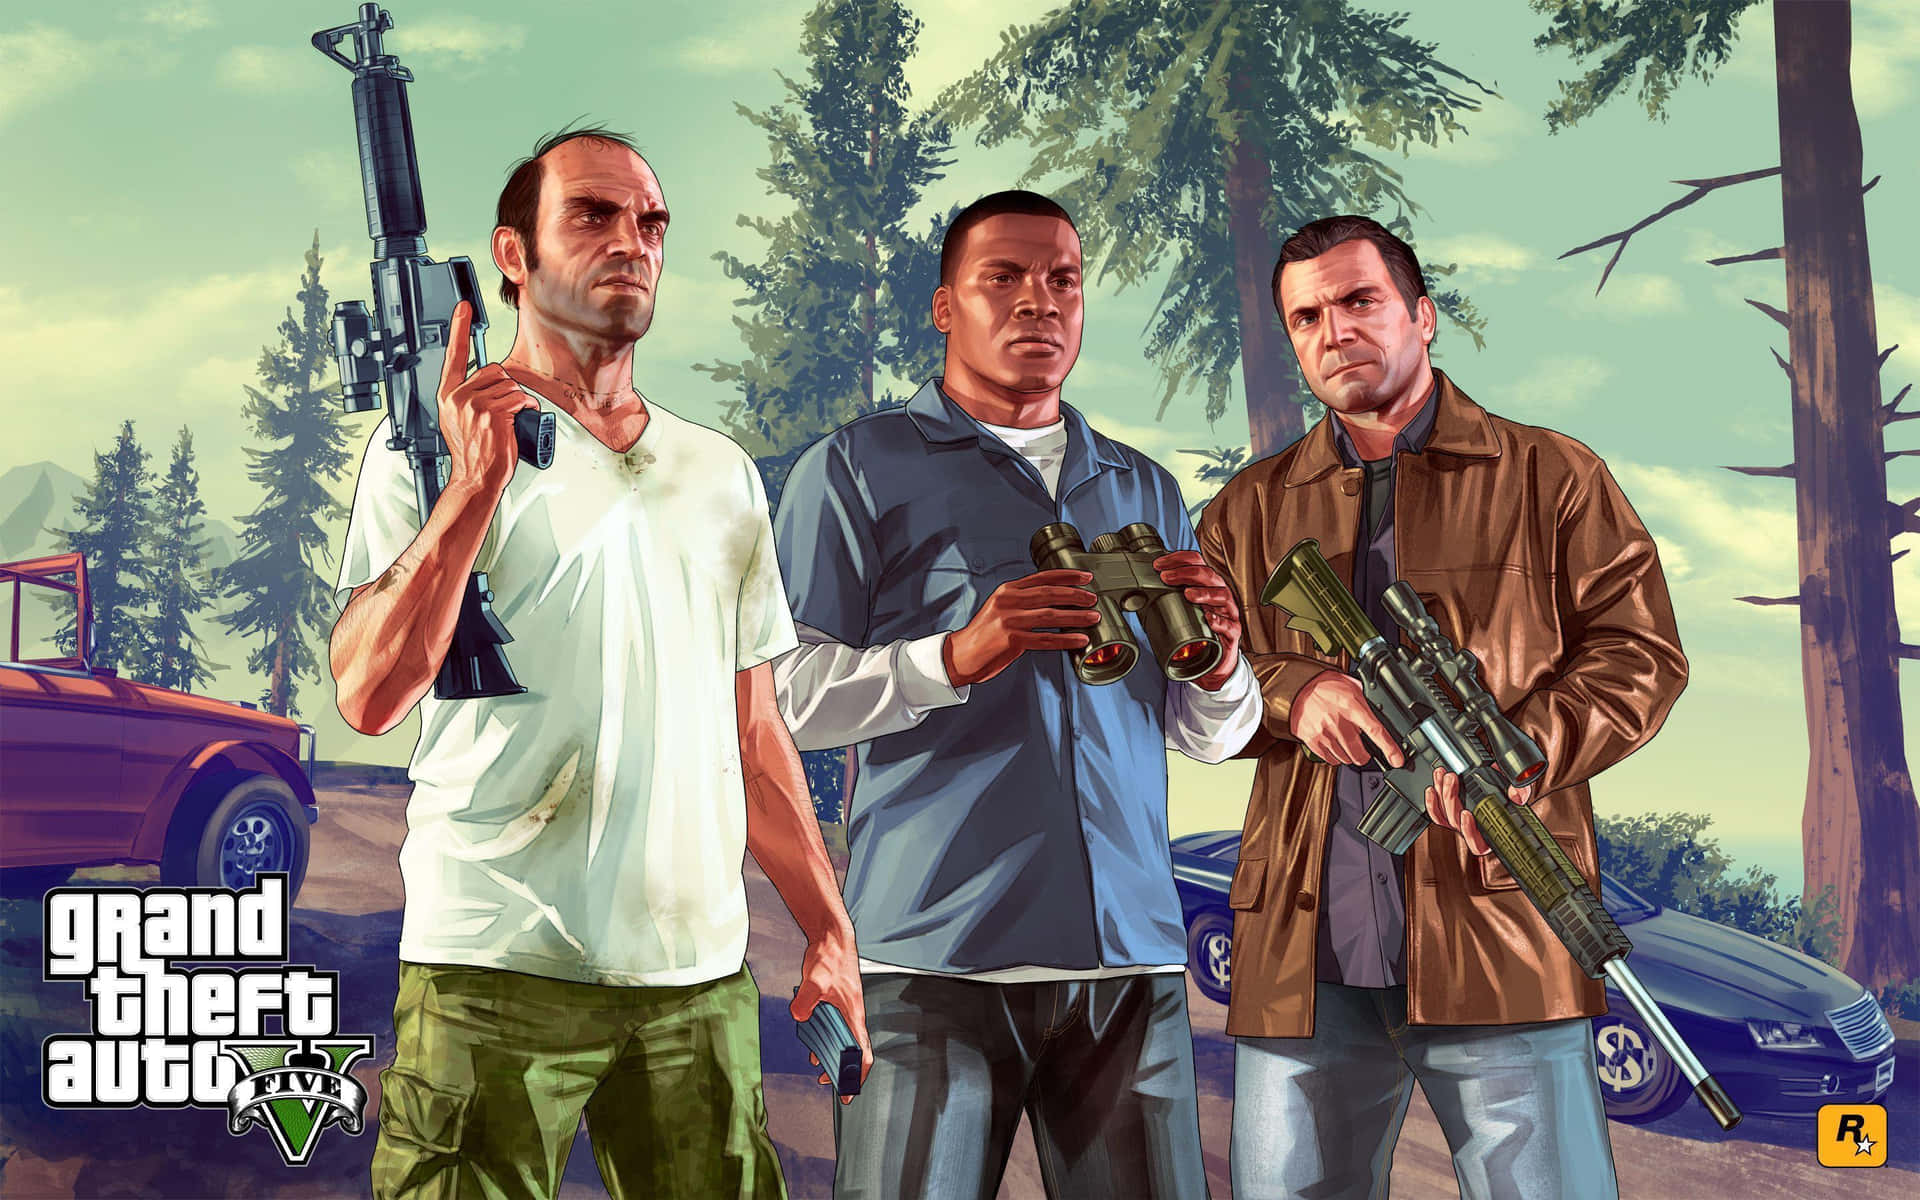 Play The Best Open-world Action Game Of The Decade With Gta 5 Desktop